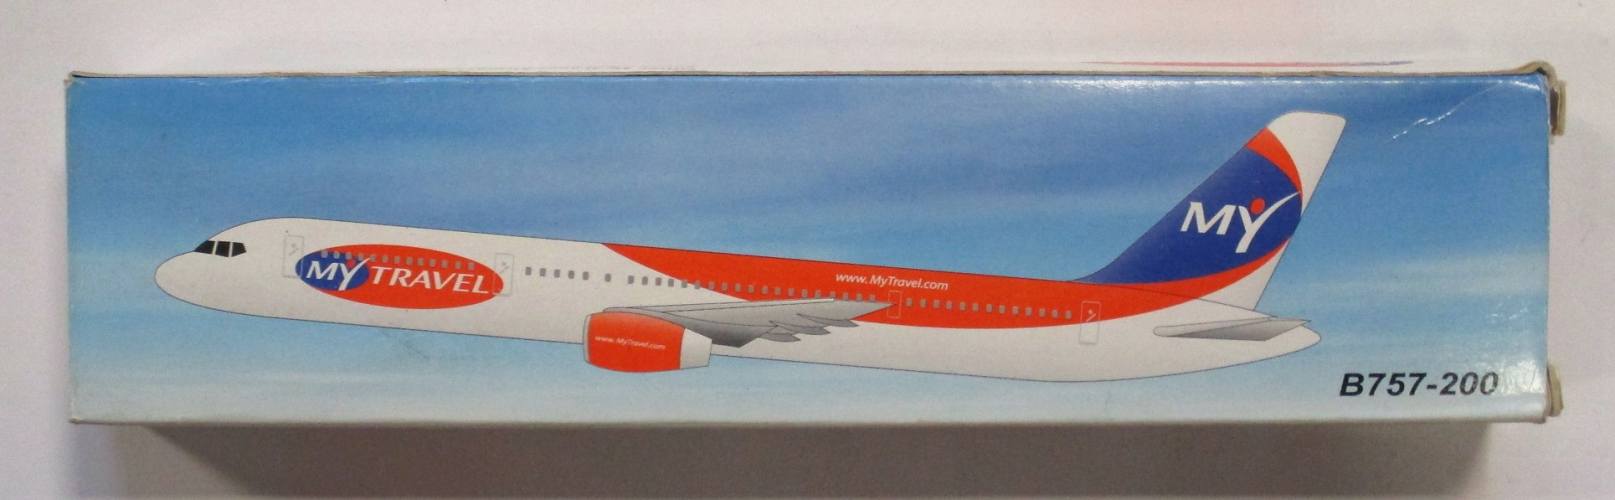 AIRLINER COLLECTIBLE  1/200 MY TRAVEL B757-200